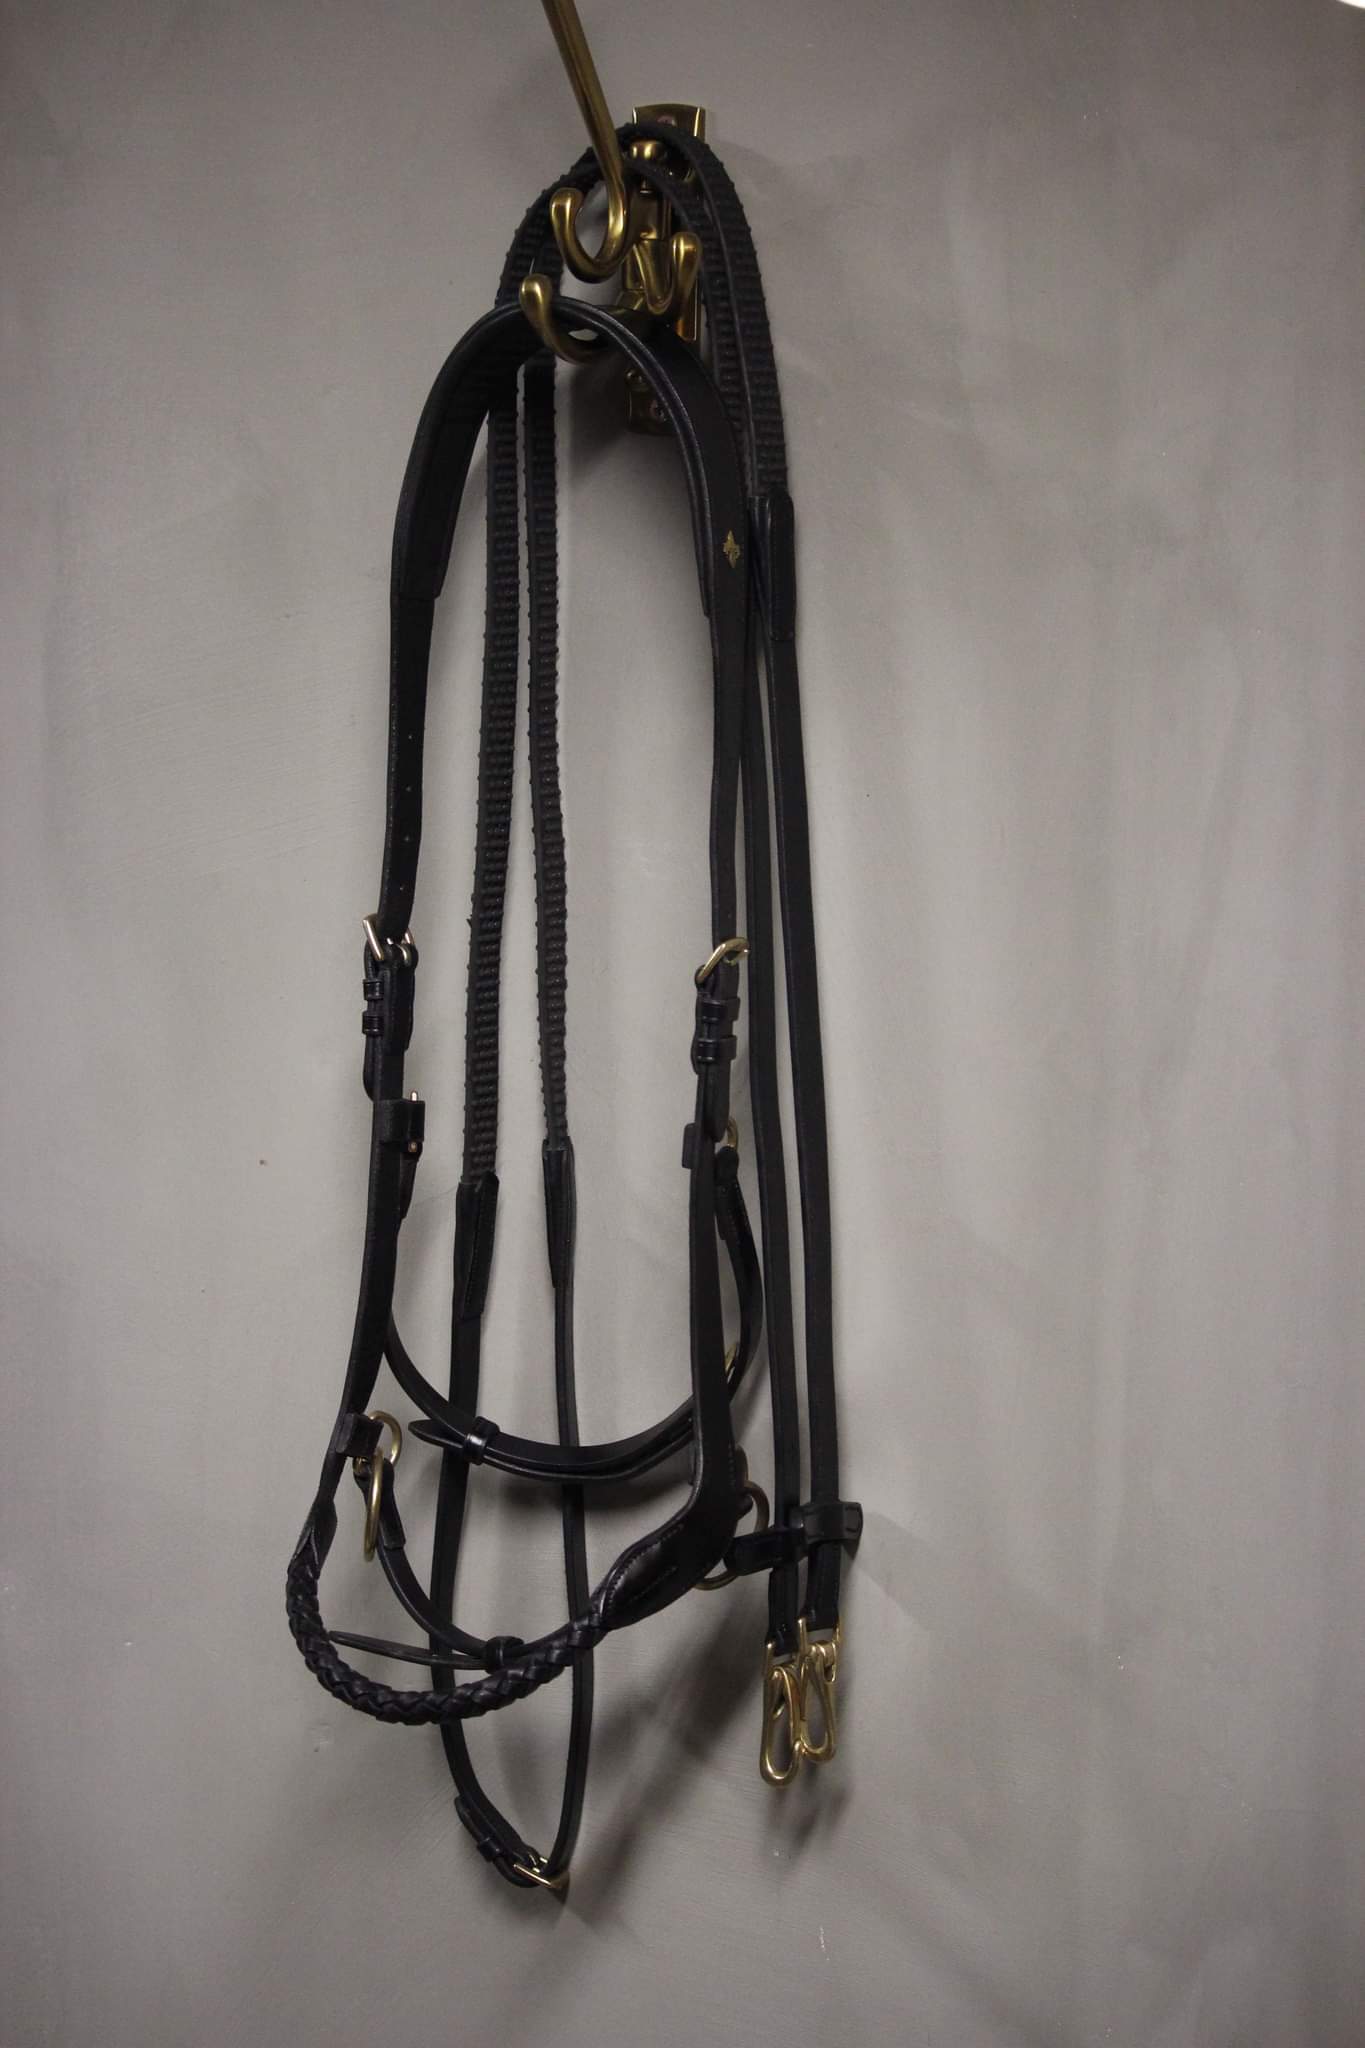 Masego Braided Sidepull Bitless Bridle - Equiluxe Tack